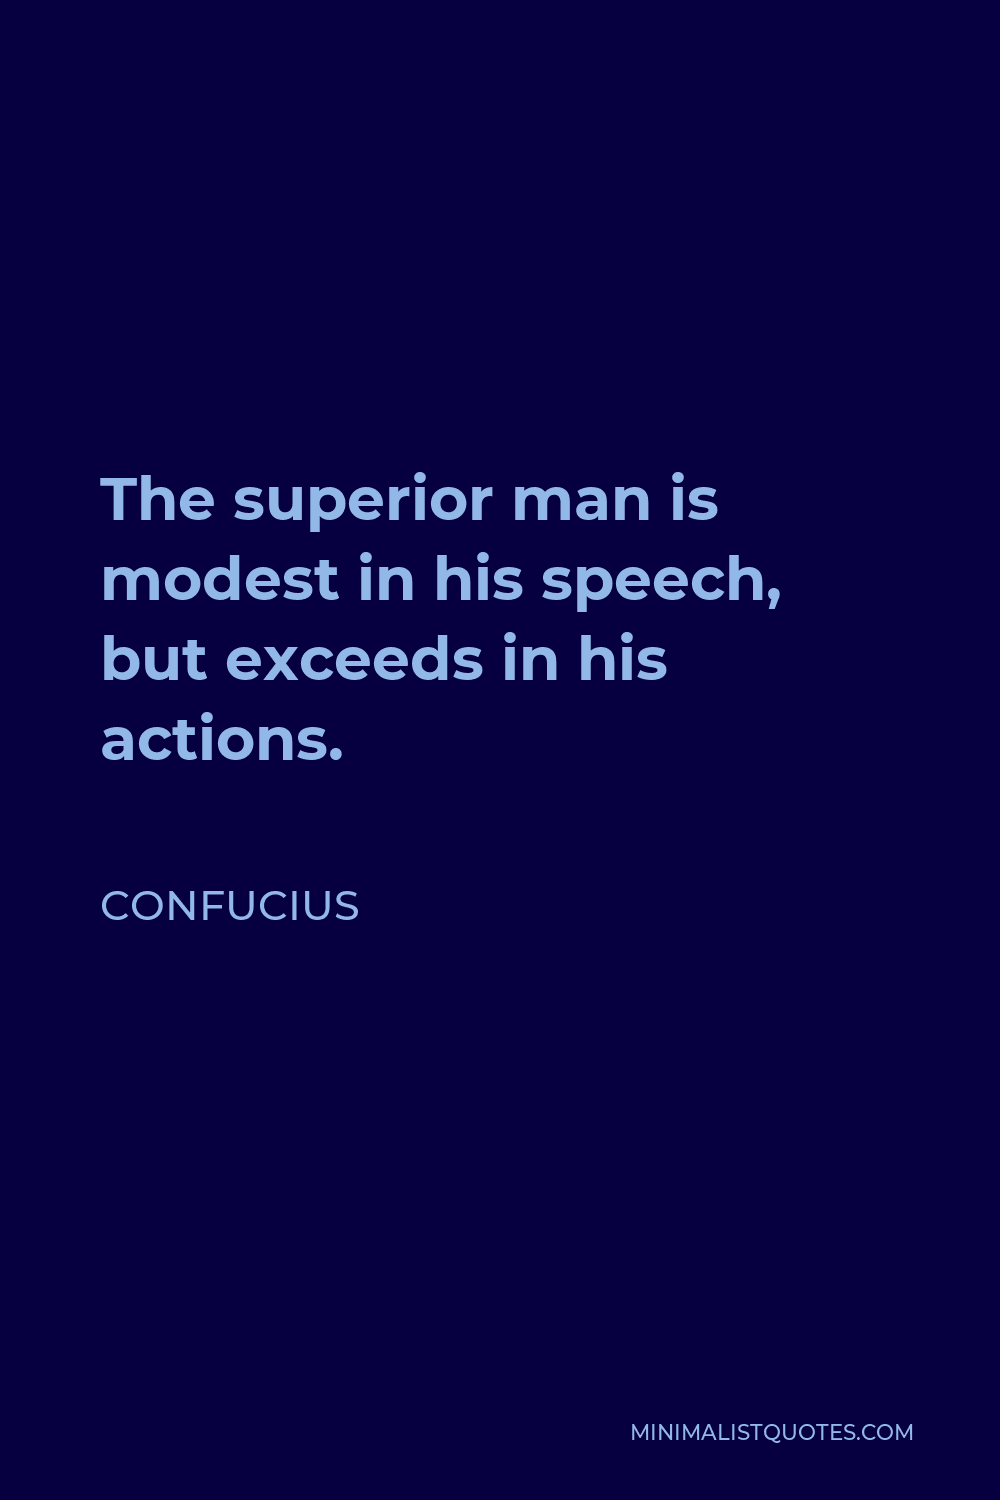 Confucius Quote - The superior man is modest in his speech, but exceeds in his actions.